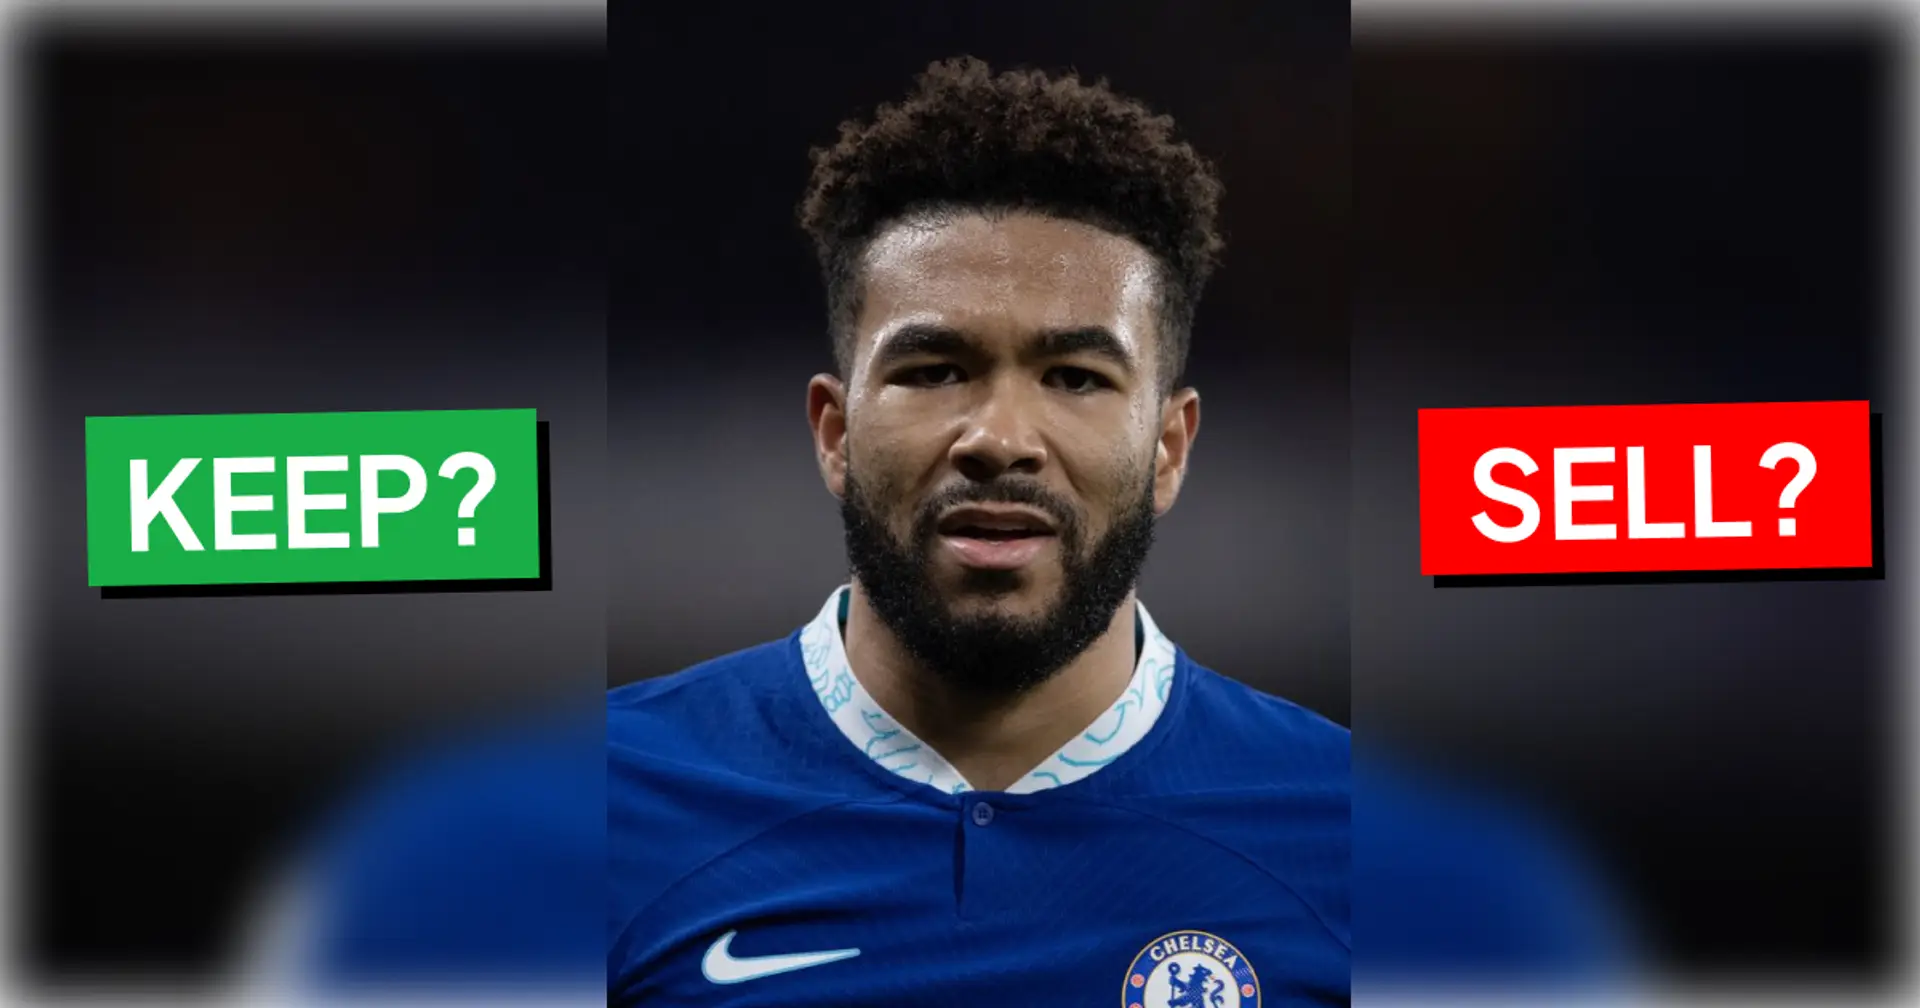 James — keep or sell? Chelsea fans split on Reece's future — have your say in the comments, too